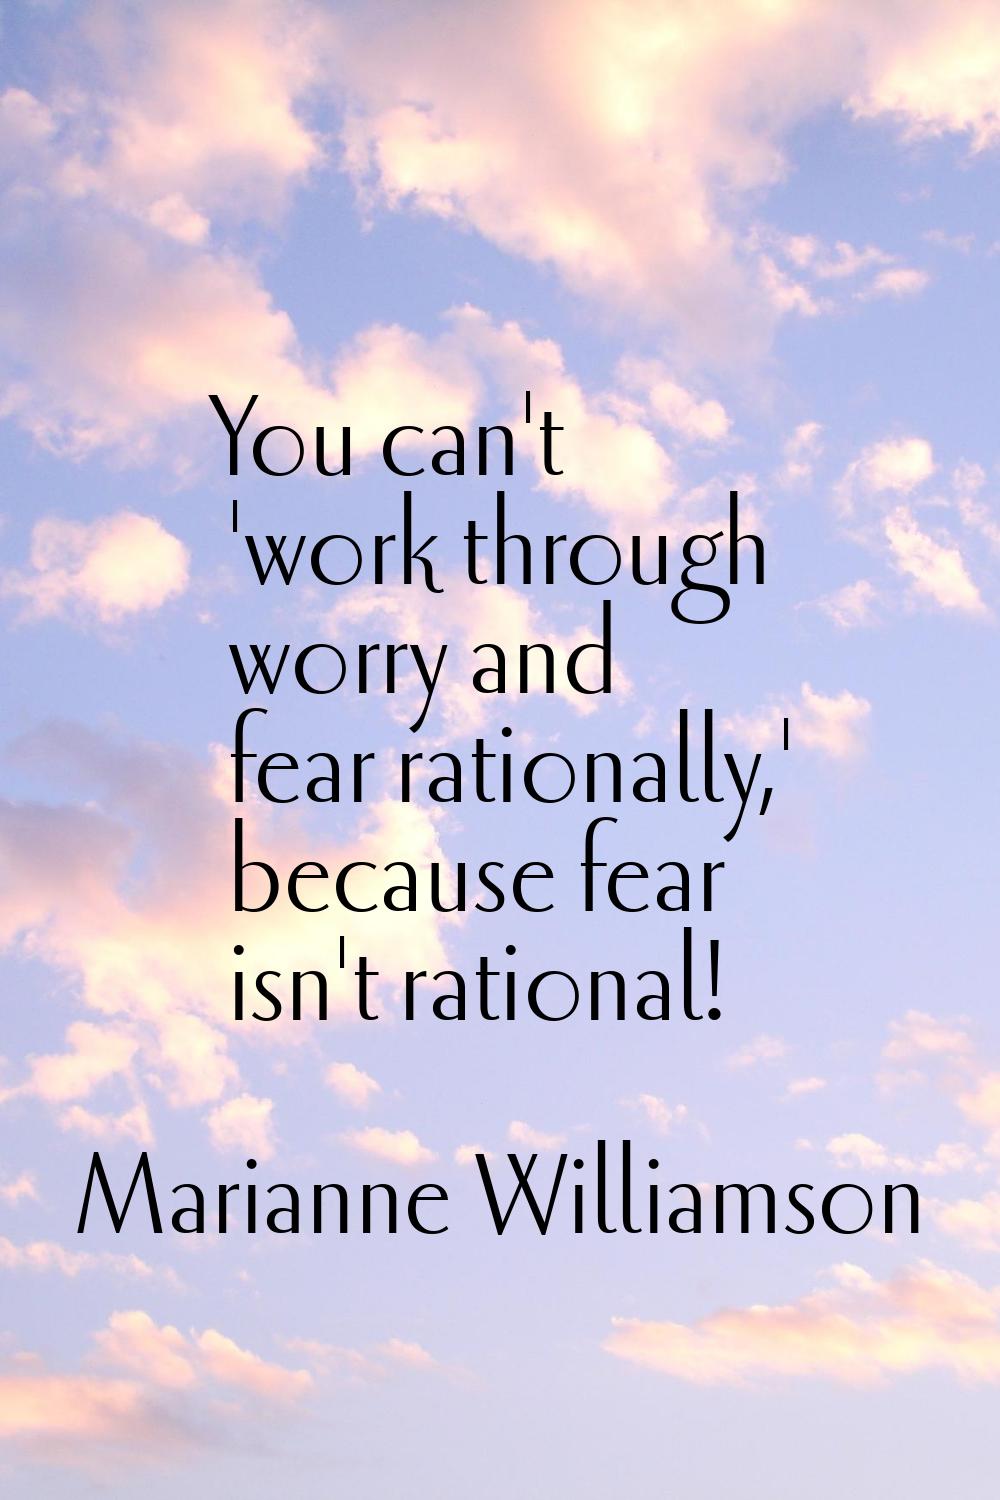 You can't 'work through worry and fear rationally,' because fear isn't rational!